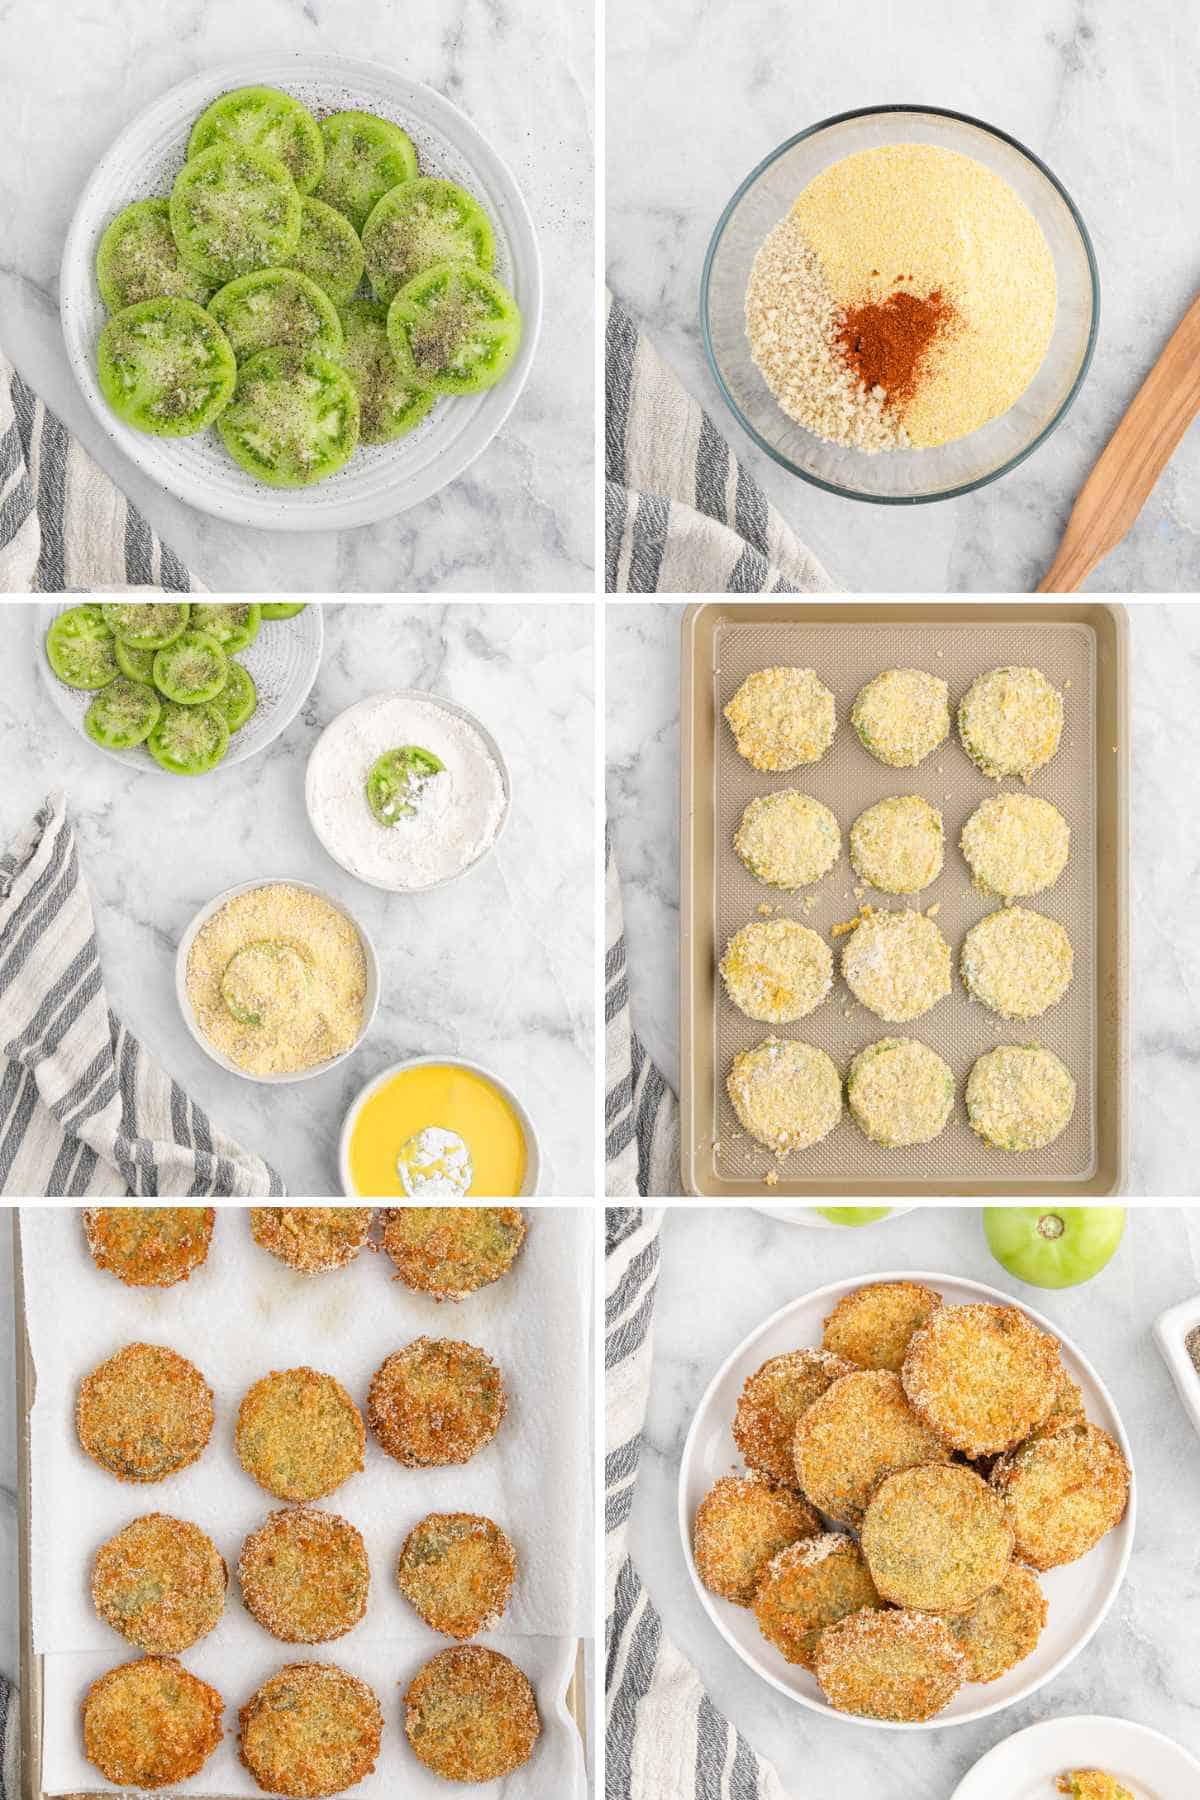 A collage of images showing the steps for making fried green tomatoes.